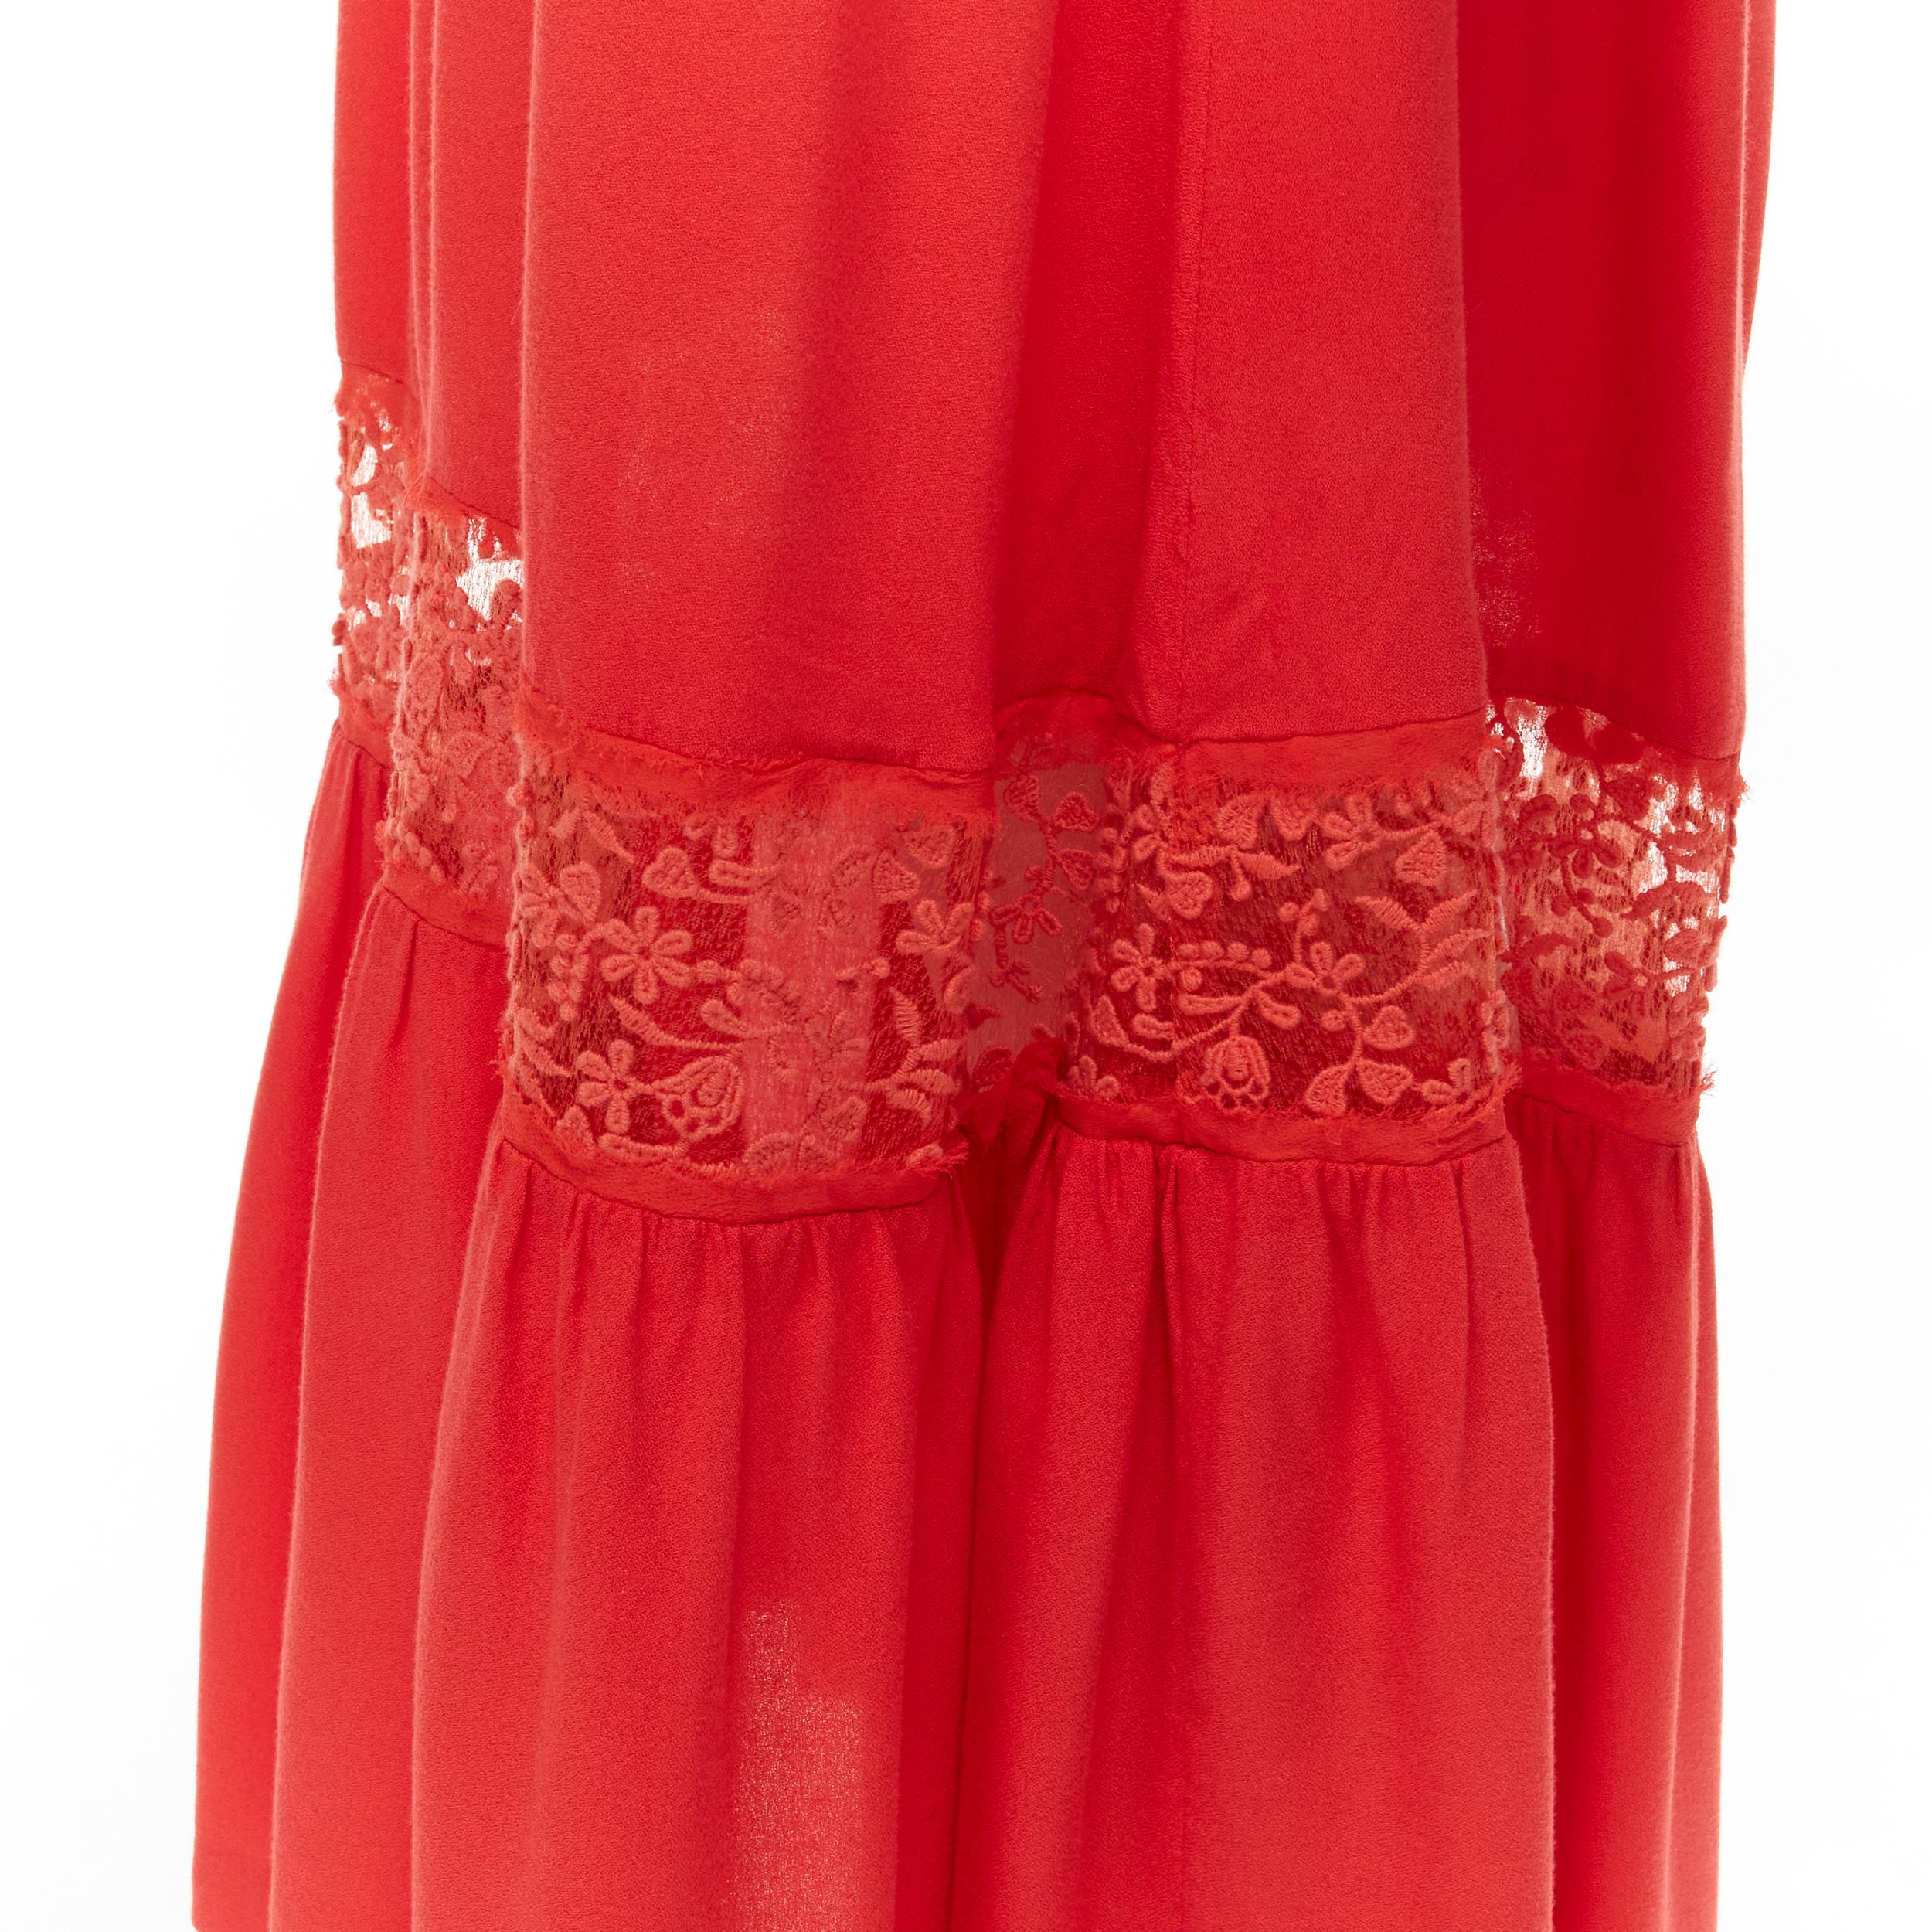 ALICE OLIVIA frayed edge ruffle collar lace trim maxi dress US2 S
Brand: Alice Olivia
Material: Feels like cotton
Color: Red
Pattern: Solid
Closure: Zip
Extra Detail: Elasticated waist band.
Made in: China

CONDITION:
Condition: Excellent, this item